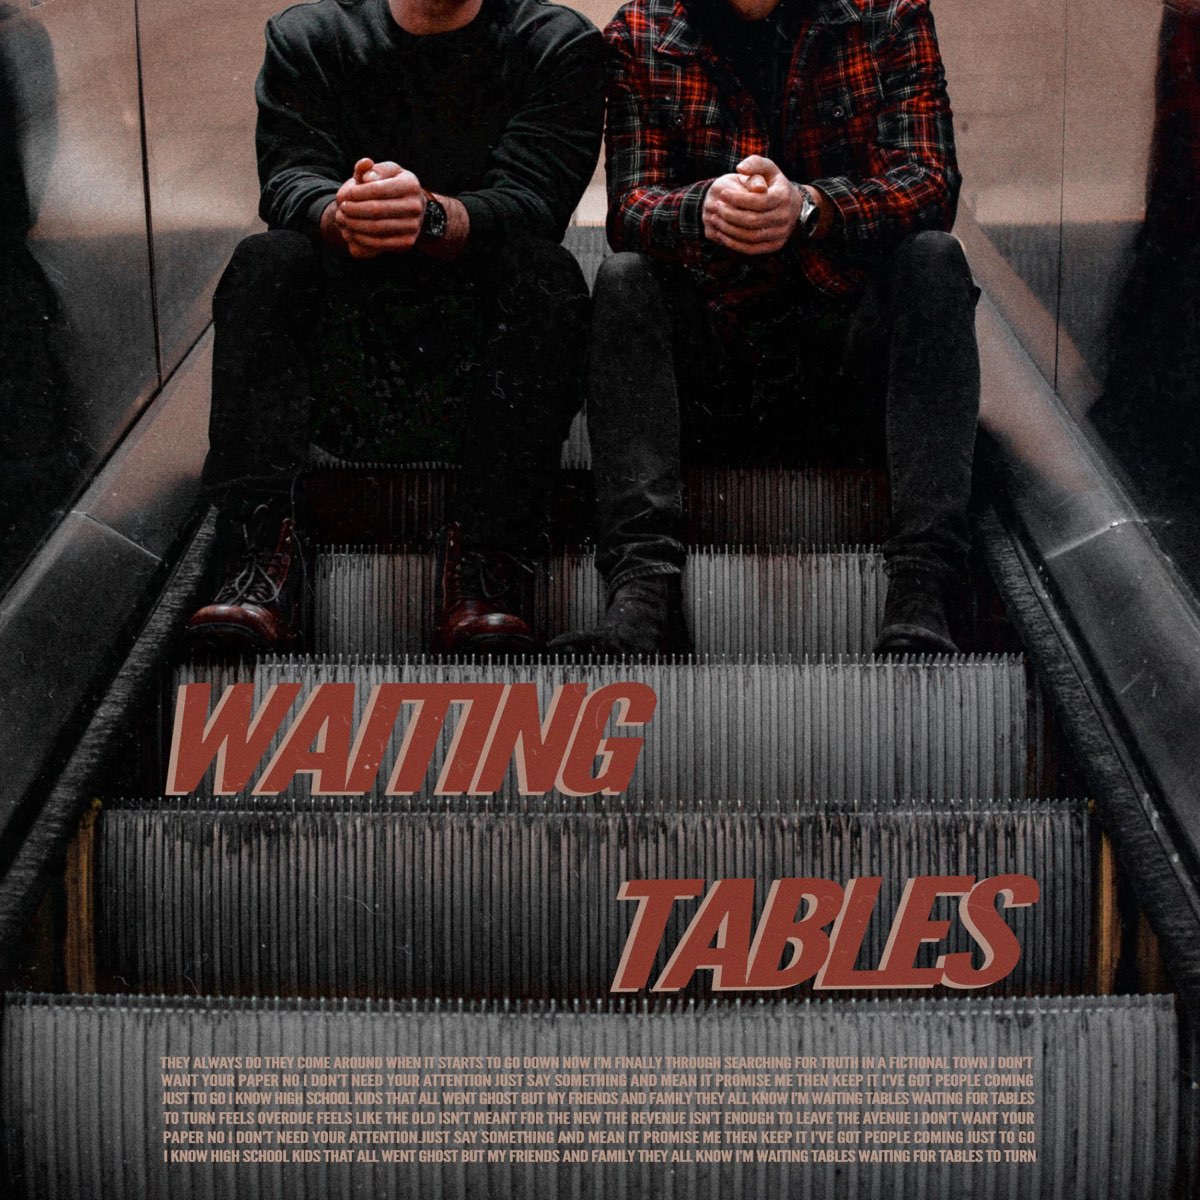 Waiting table